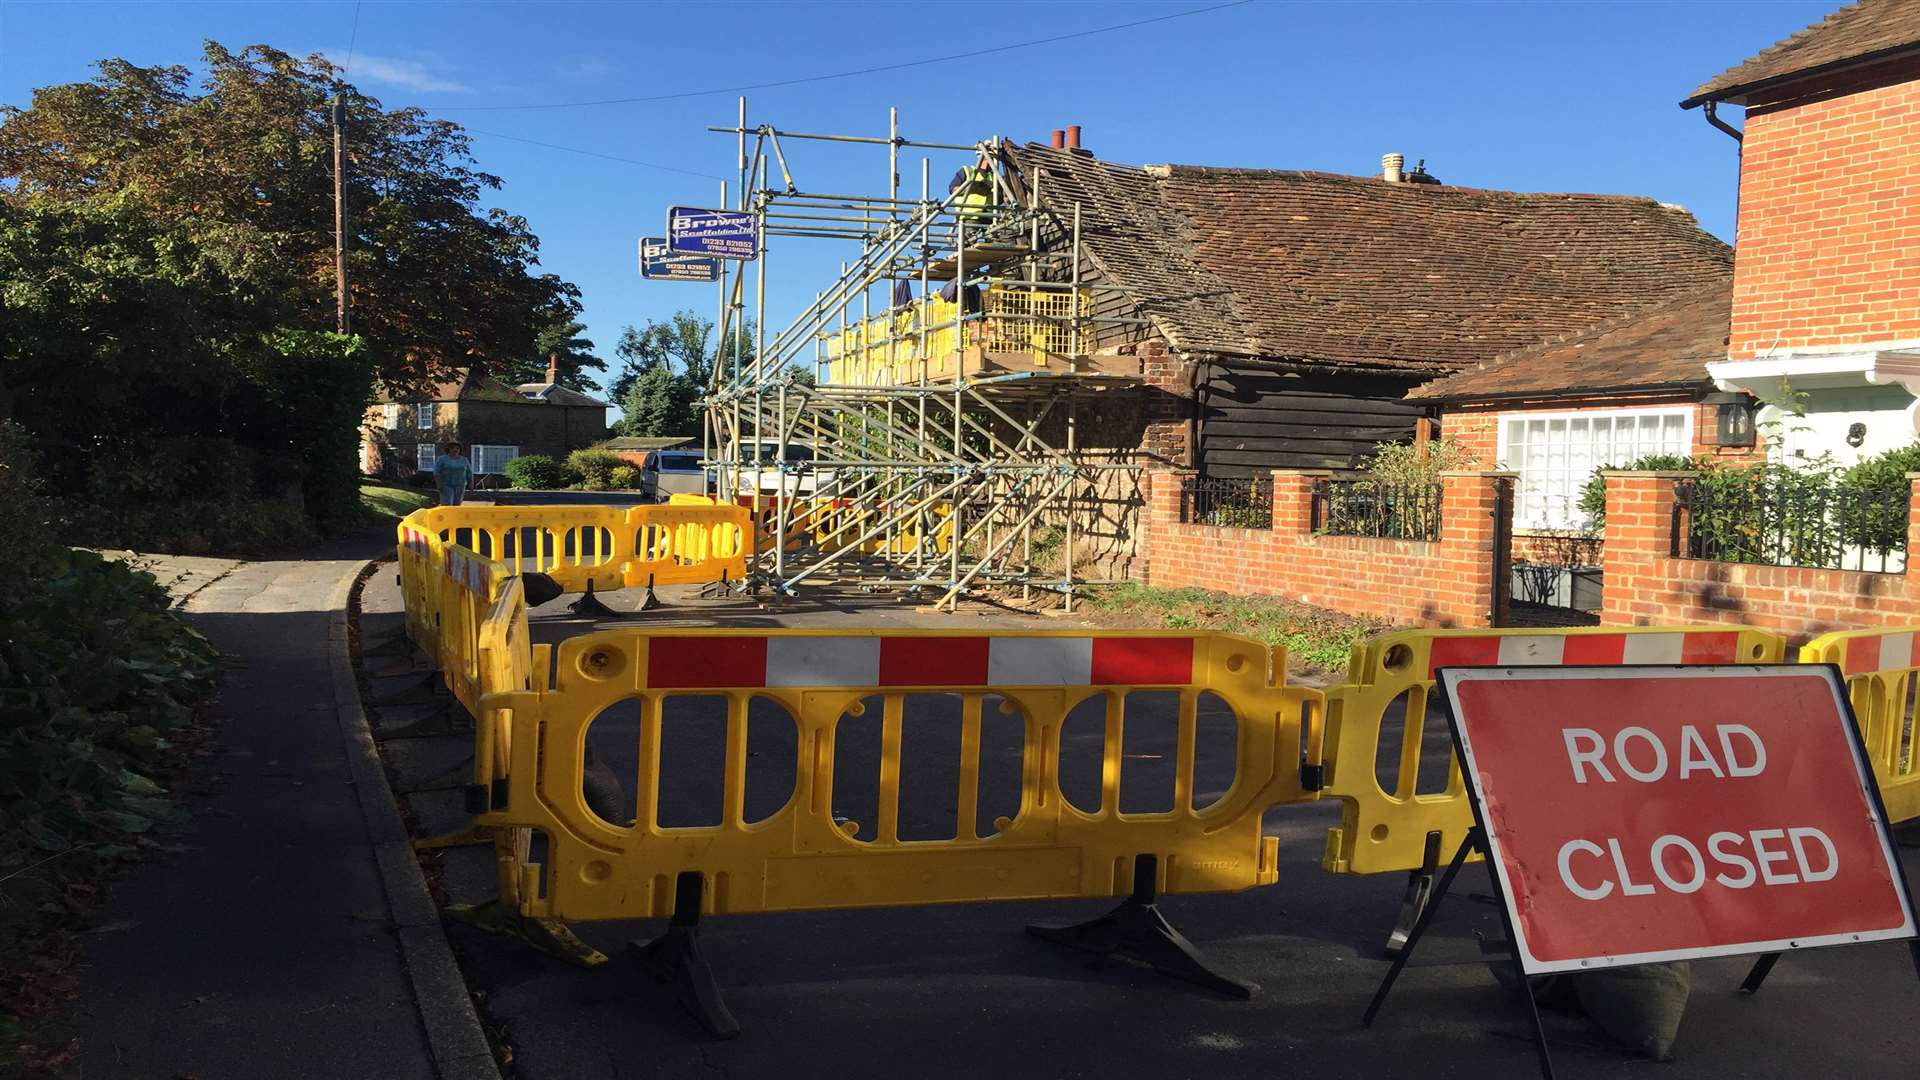 The road will be closed for three weeks